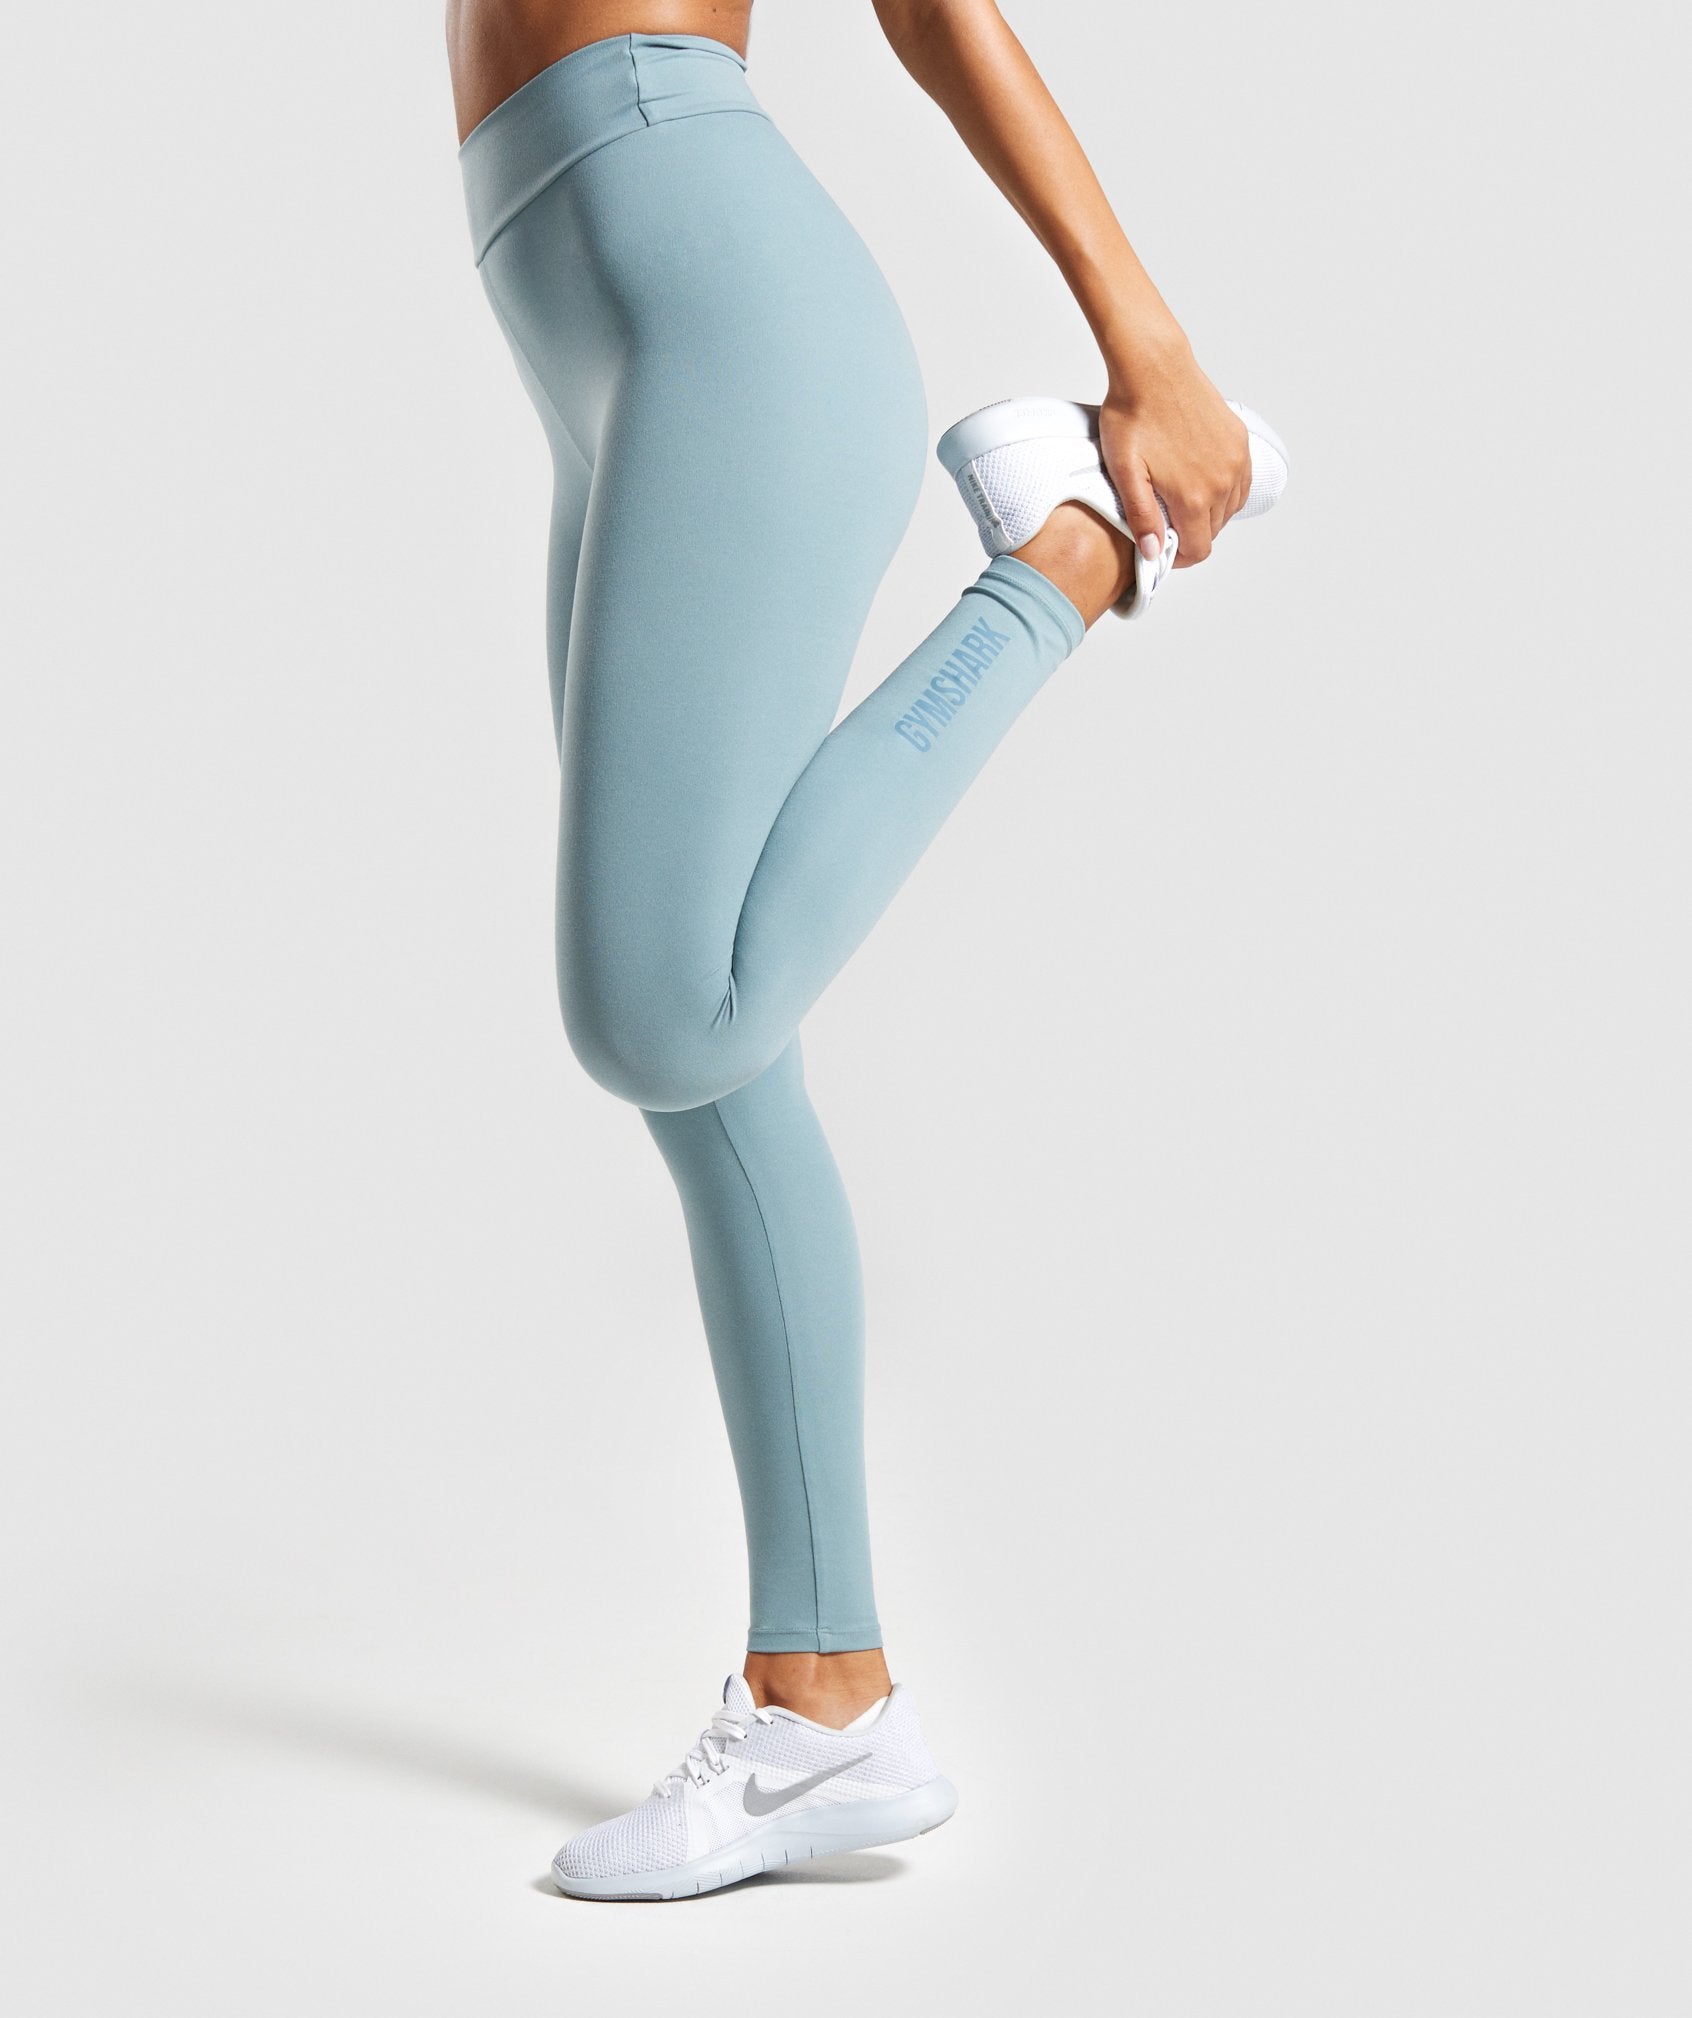 Solo Leggings in Turquoise - view 3